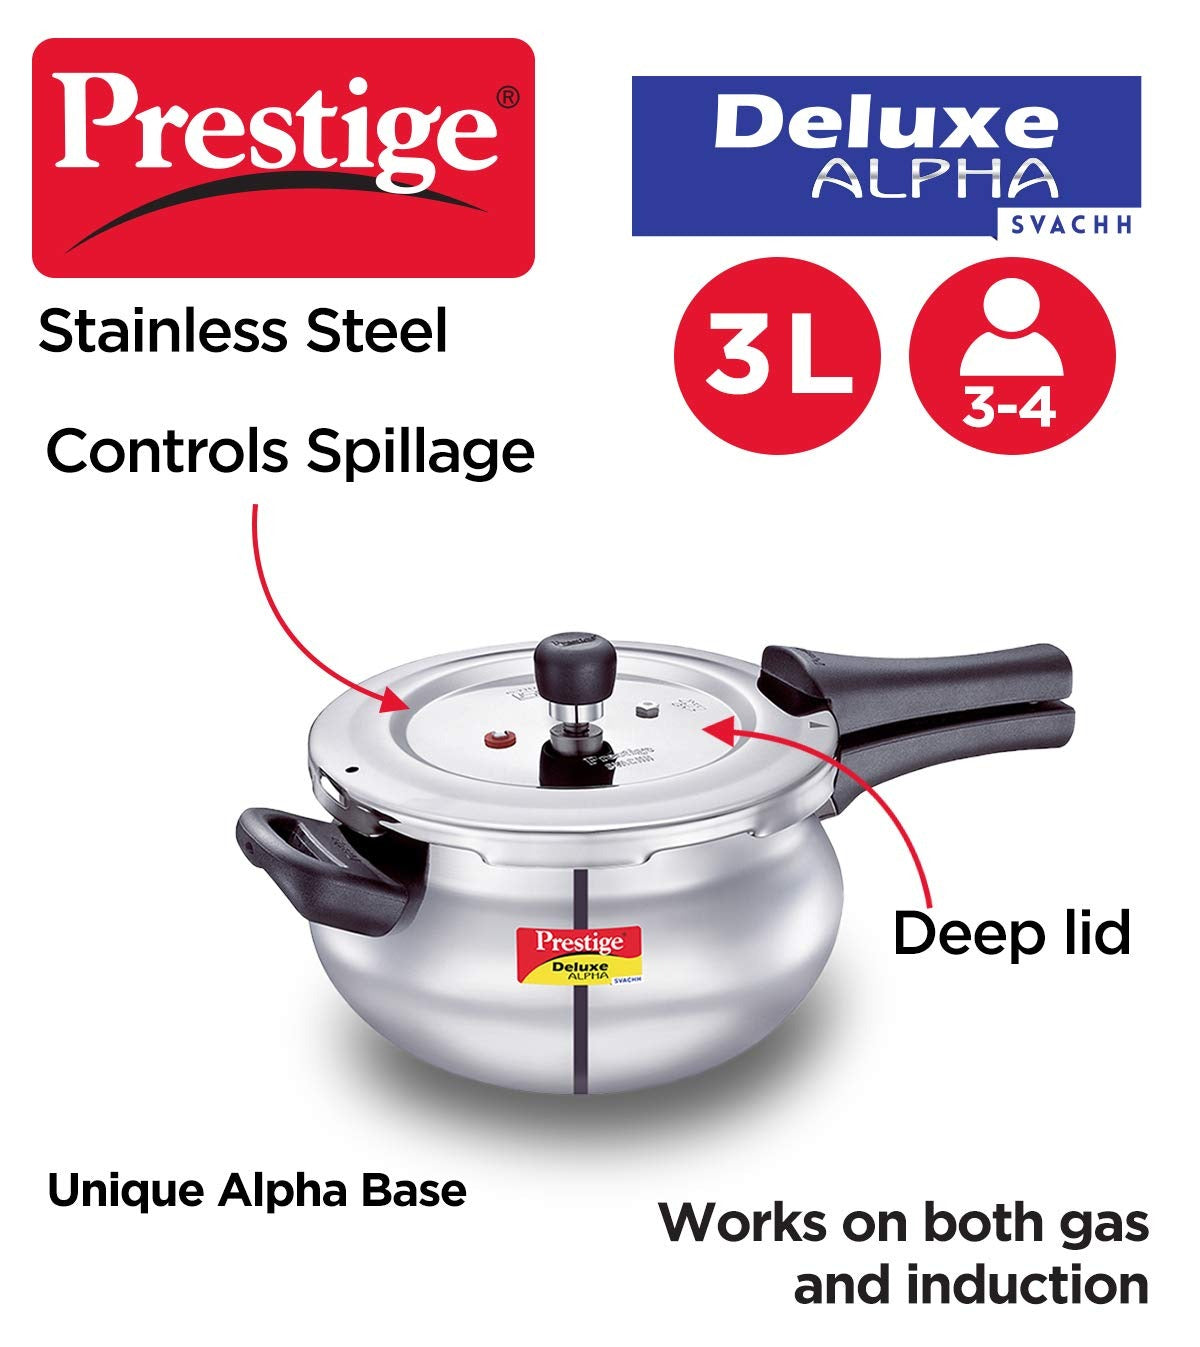 Prestige Svachh Deluxe Alpha Mini Pressure Handi, with deep lid for Spillage Control, 3 L, Stainless Steel, Silver, Outer Lid